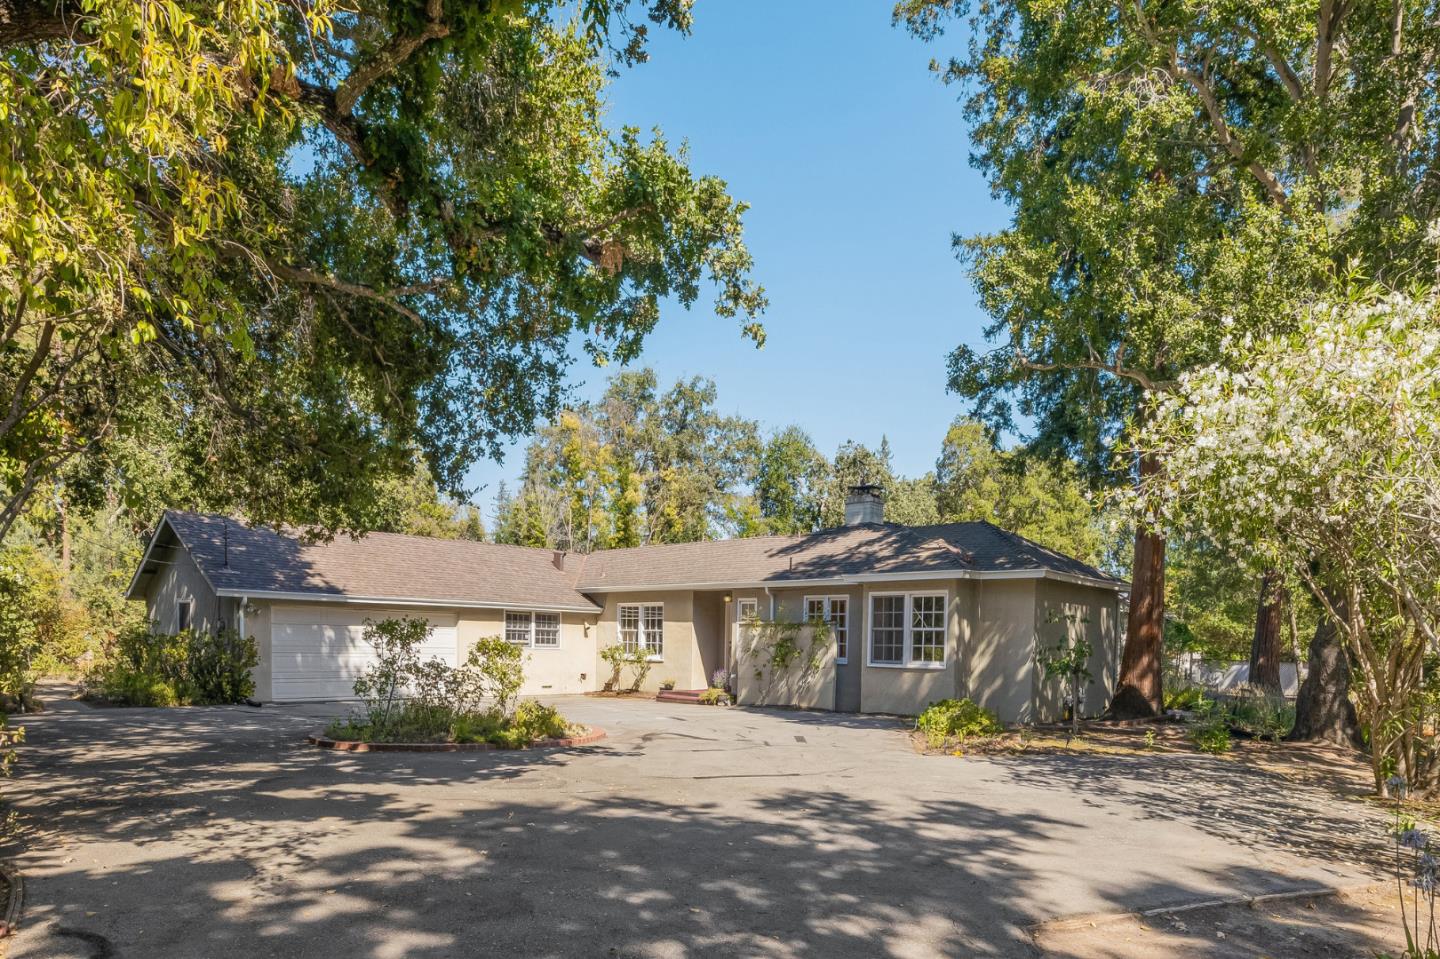 285 Camino Al Lago presents a unique opportunity to expand, renovate, or build new on an approximately 1.25 acre parcel in prime West Atherton. The private and serene setting is sheltered from the street and showcases majestic heritage trees. The home falls in the coveted Las Lomitas School District and also offers outstanding private schools. Enjoy a close proximity to downtown Menlo Park and Palo Alto, the Menlo Circus Club, Stanford University, and Sand Hill Road. A short 20 +/- minute drive to both San Francisco and San Jose International Airports.